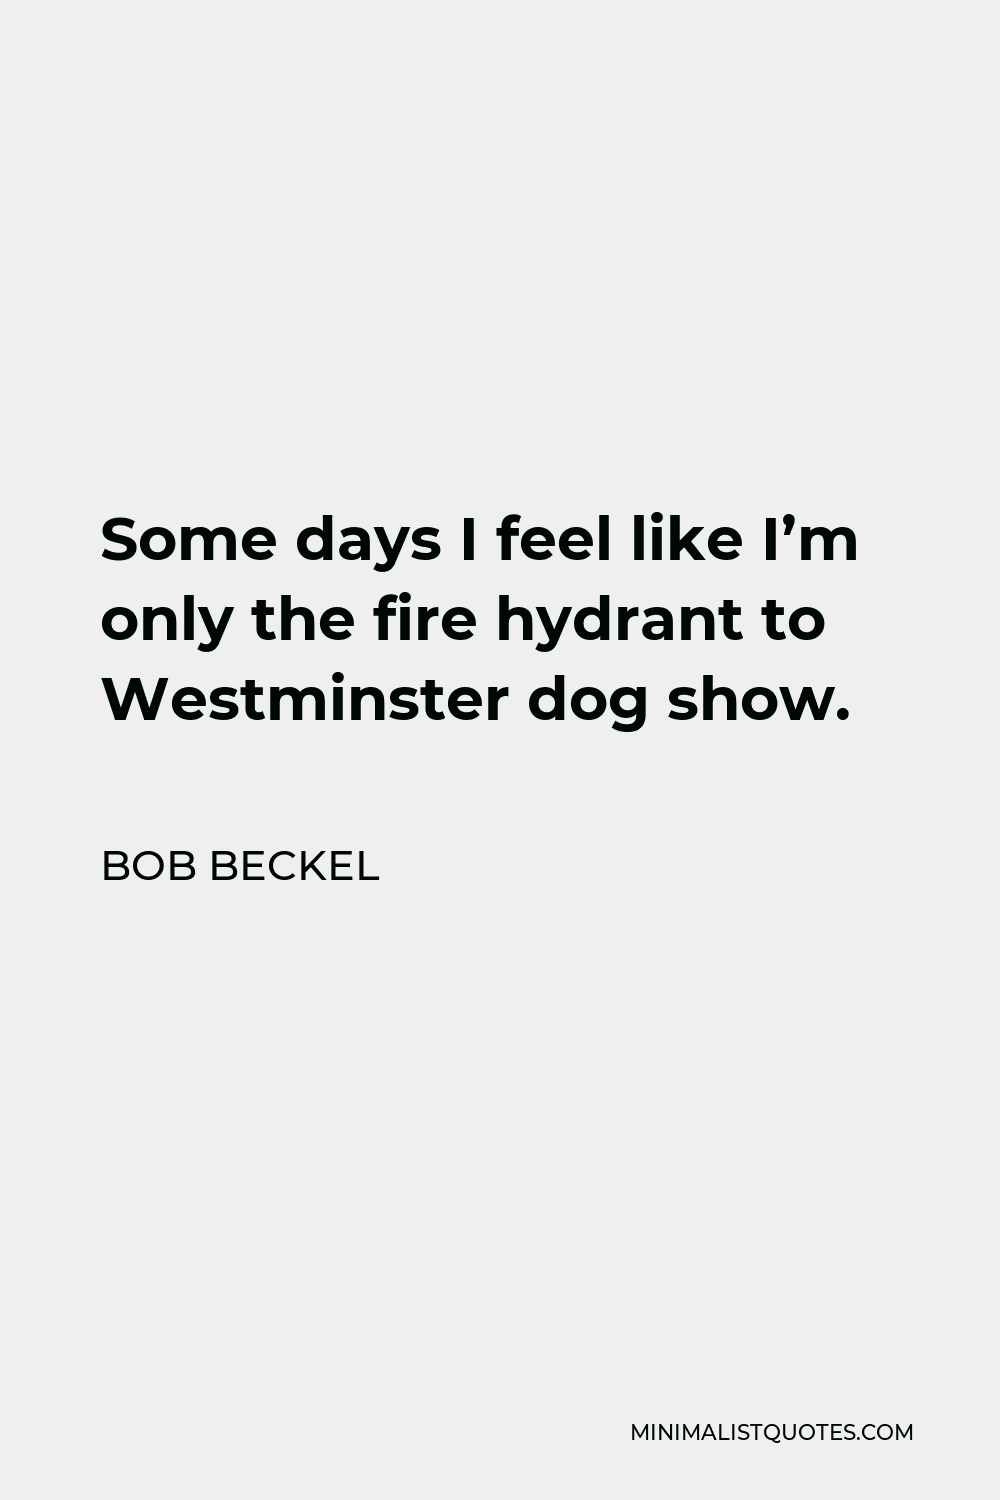 Bob Beckel Quote - Some days I feel like I’m only the fire hydrant to Westminster dog show.